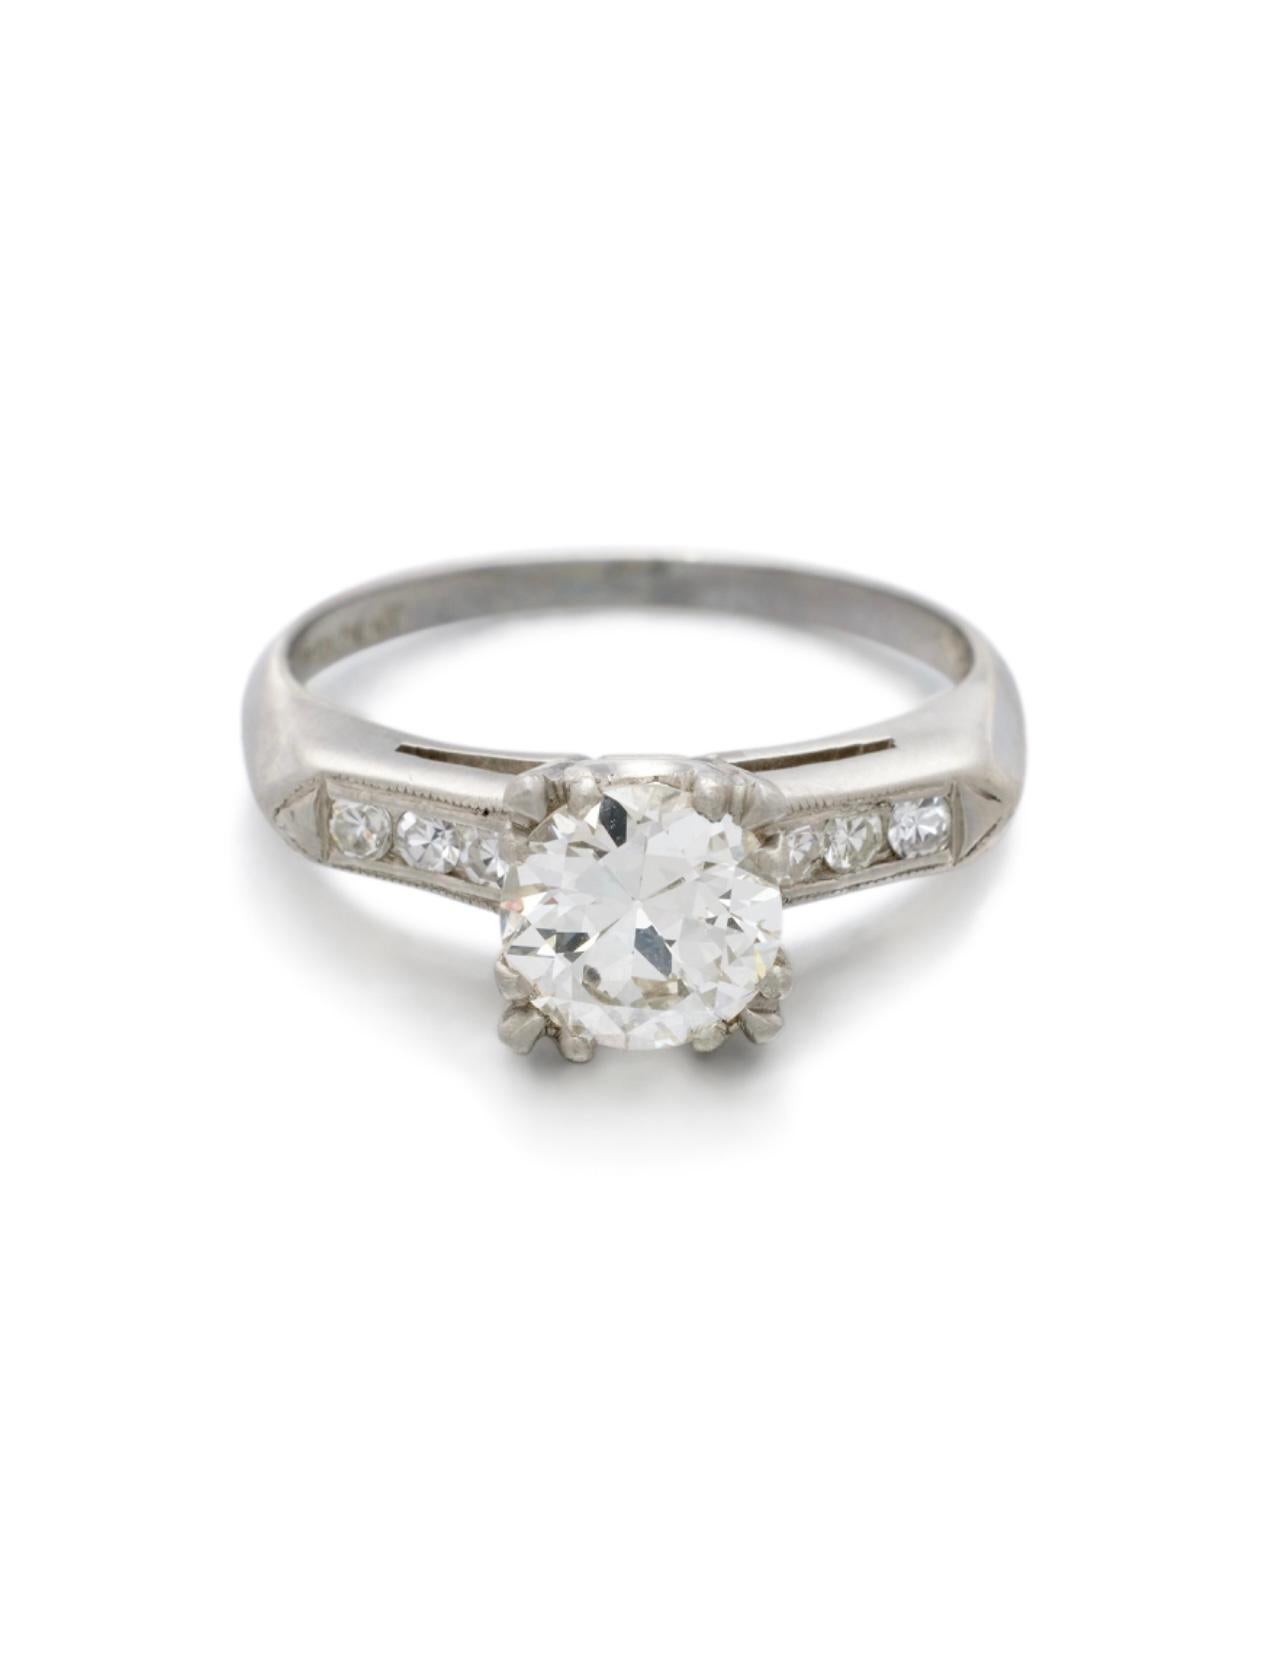 Very pretty and elegant antique style old European cut diamond engagement ring in platinum. 
The details are as follows : 
Old European cut diamond  : 1.01 carat 
Color: I color 
Clarity : VVS1 Clarity 
Metal : Platinum 
Ring size : 7 1/4 

